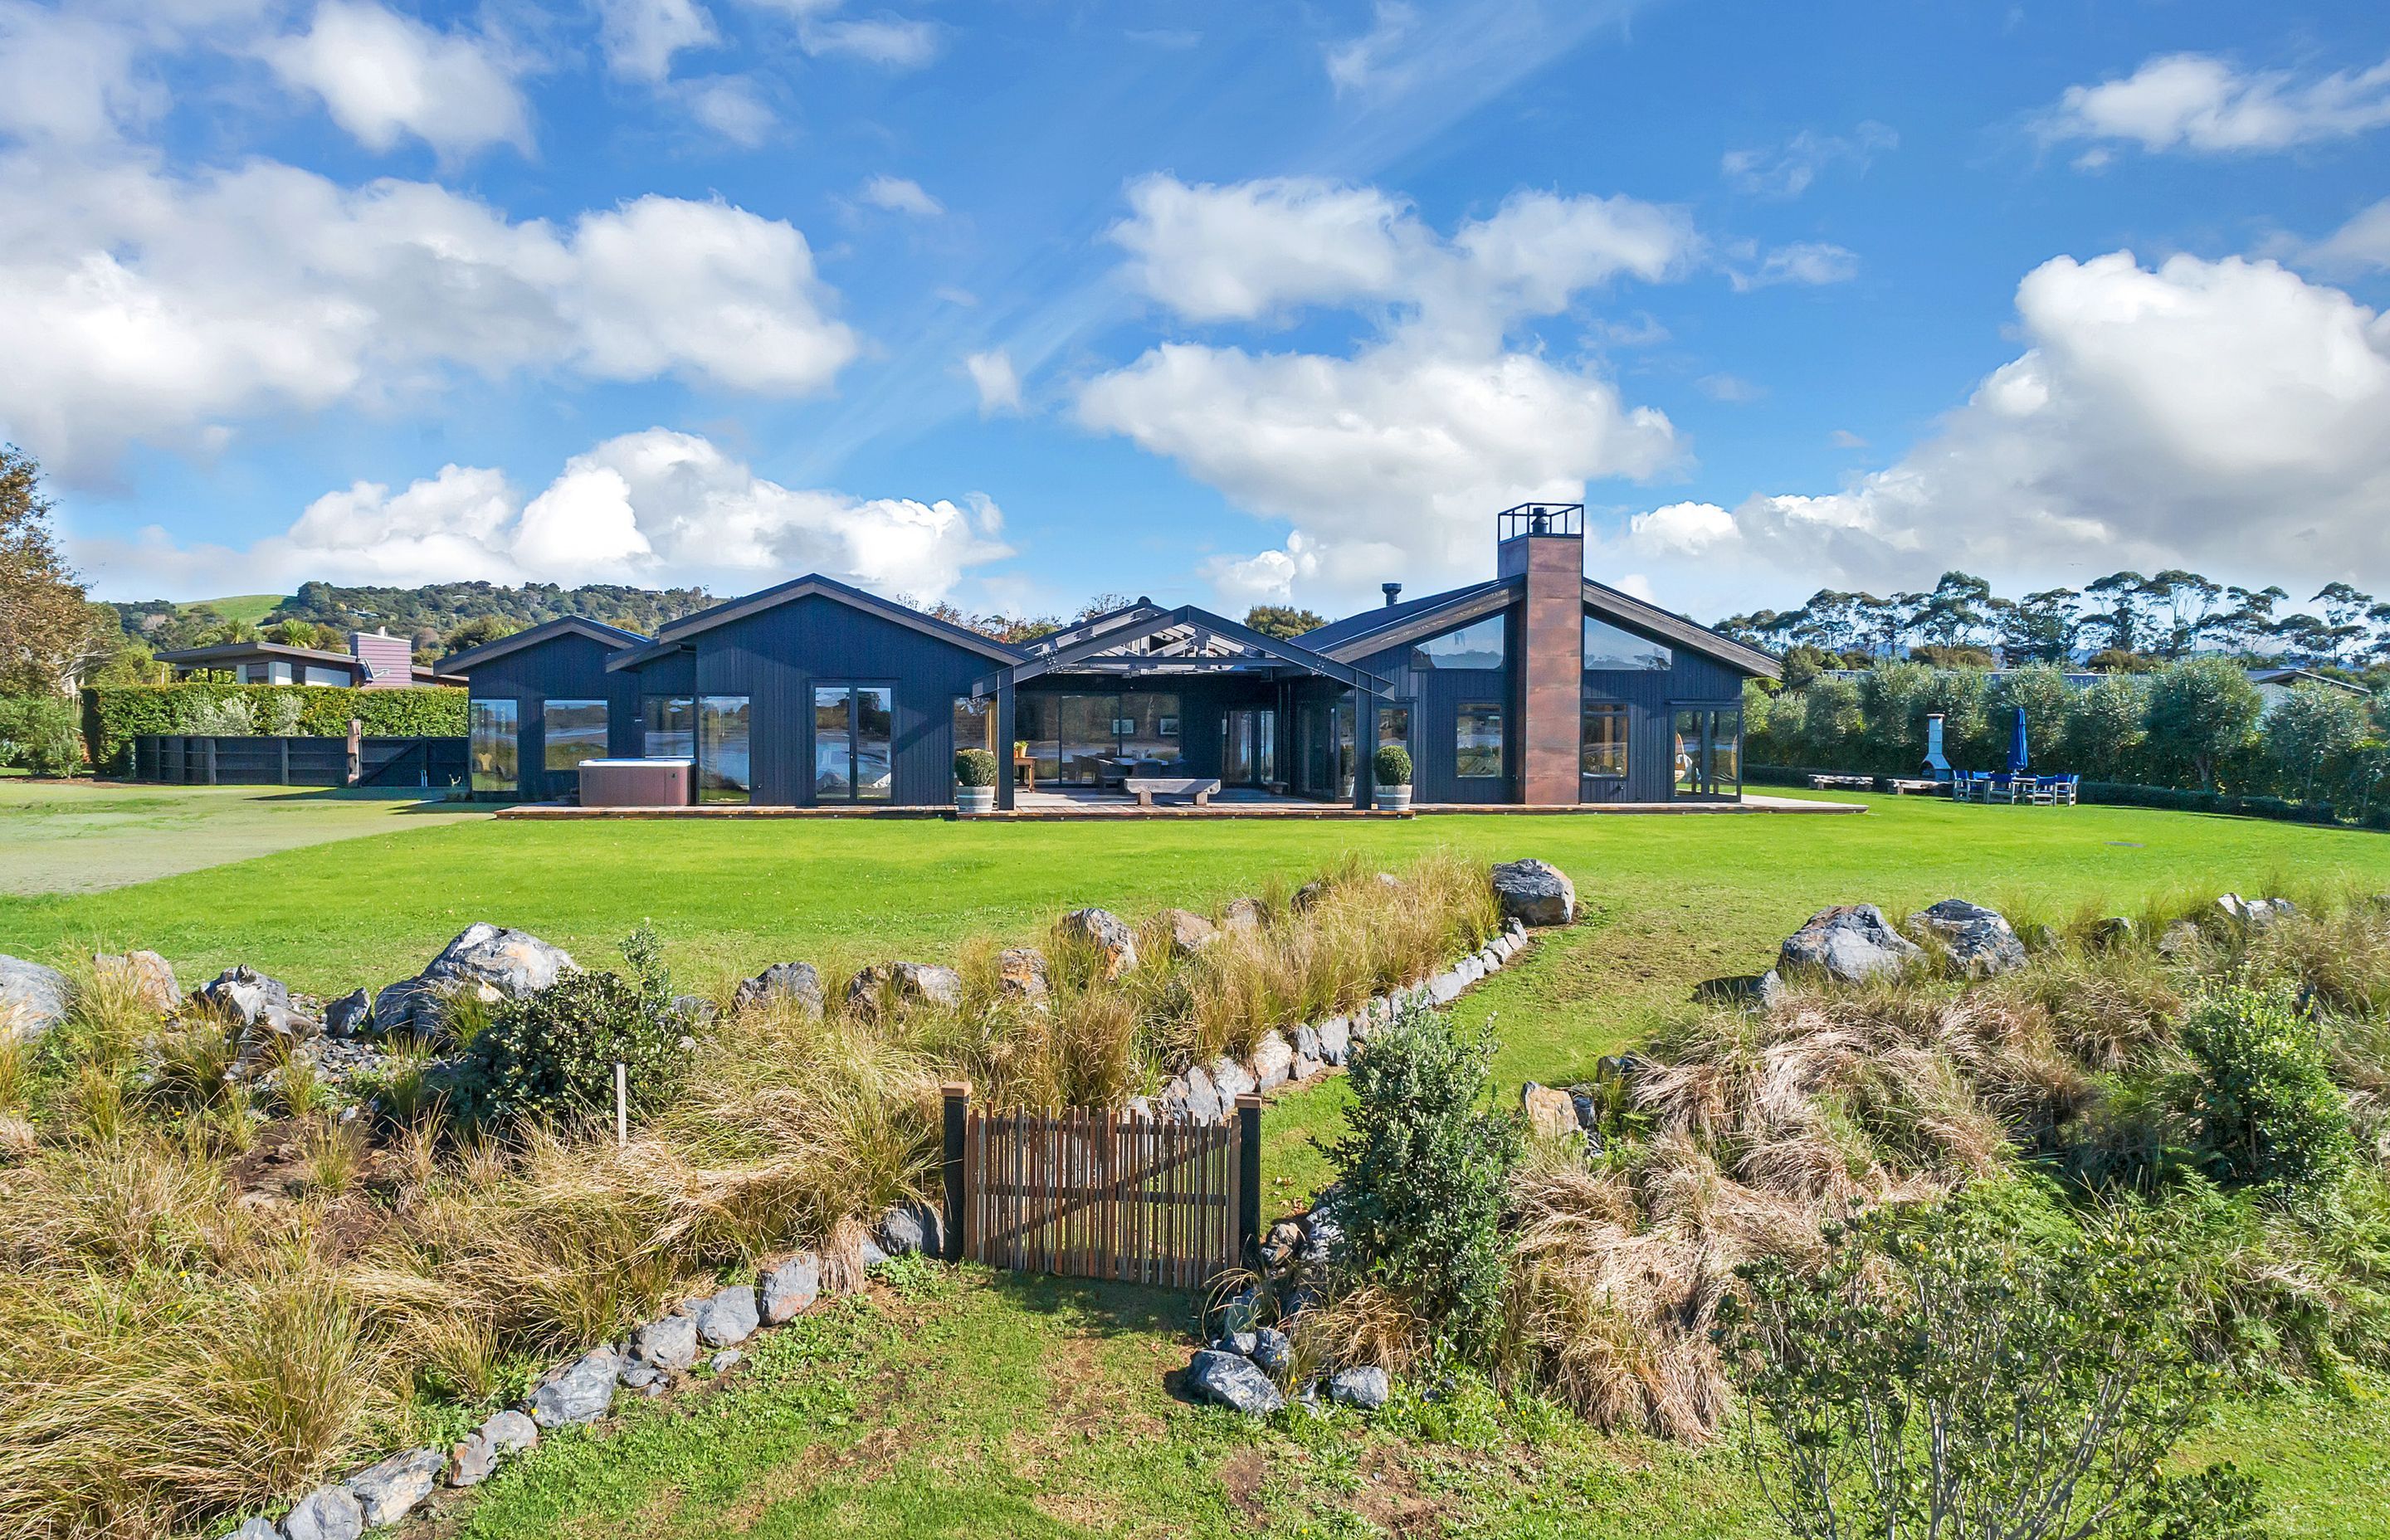 Situated on a 3,139m² site at Mangawhai, Wapu Gables was a labour of love and craft for its owners, builders' Smith Construction, and designers Dream Planning.